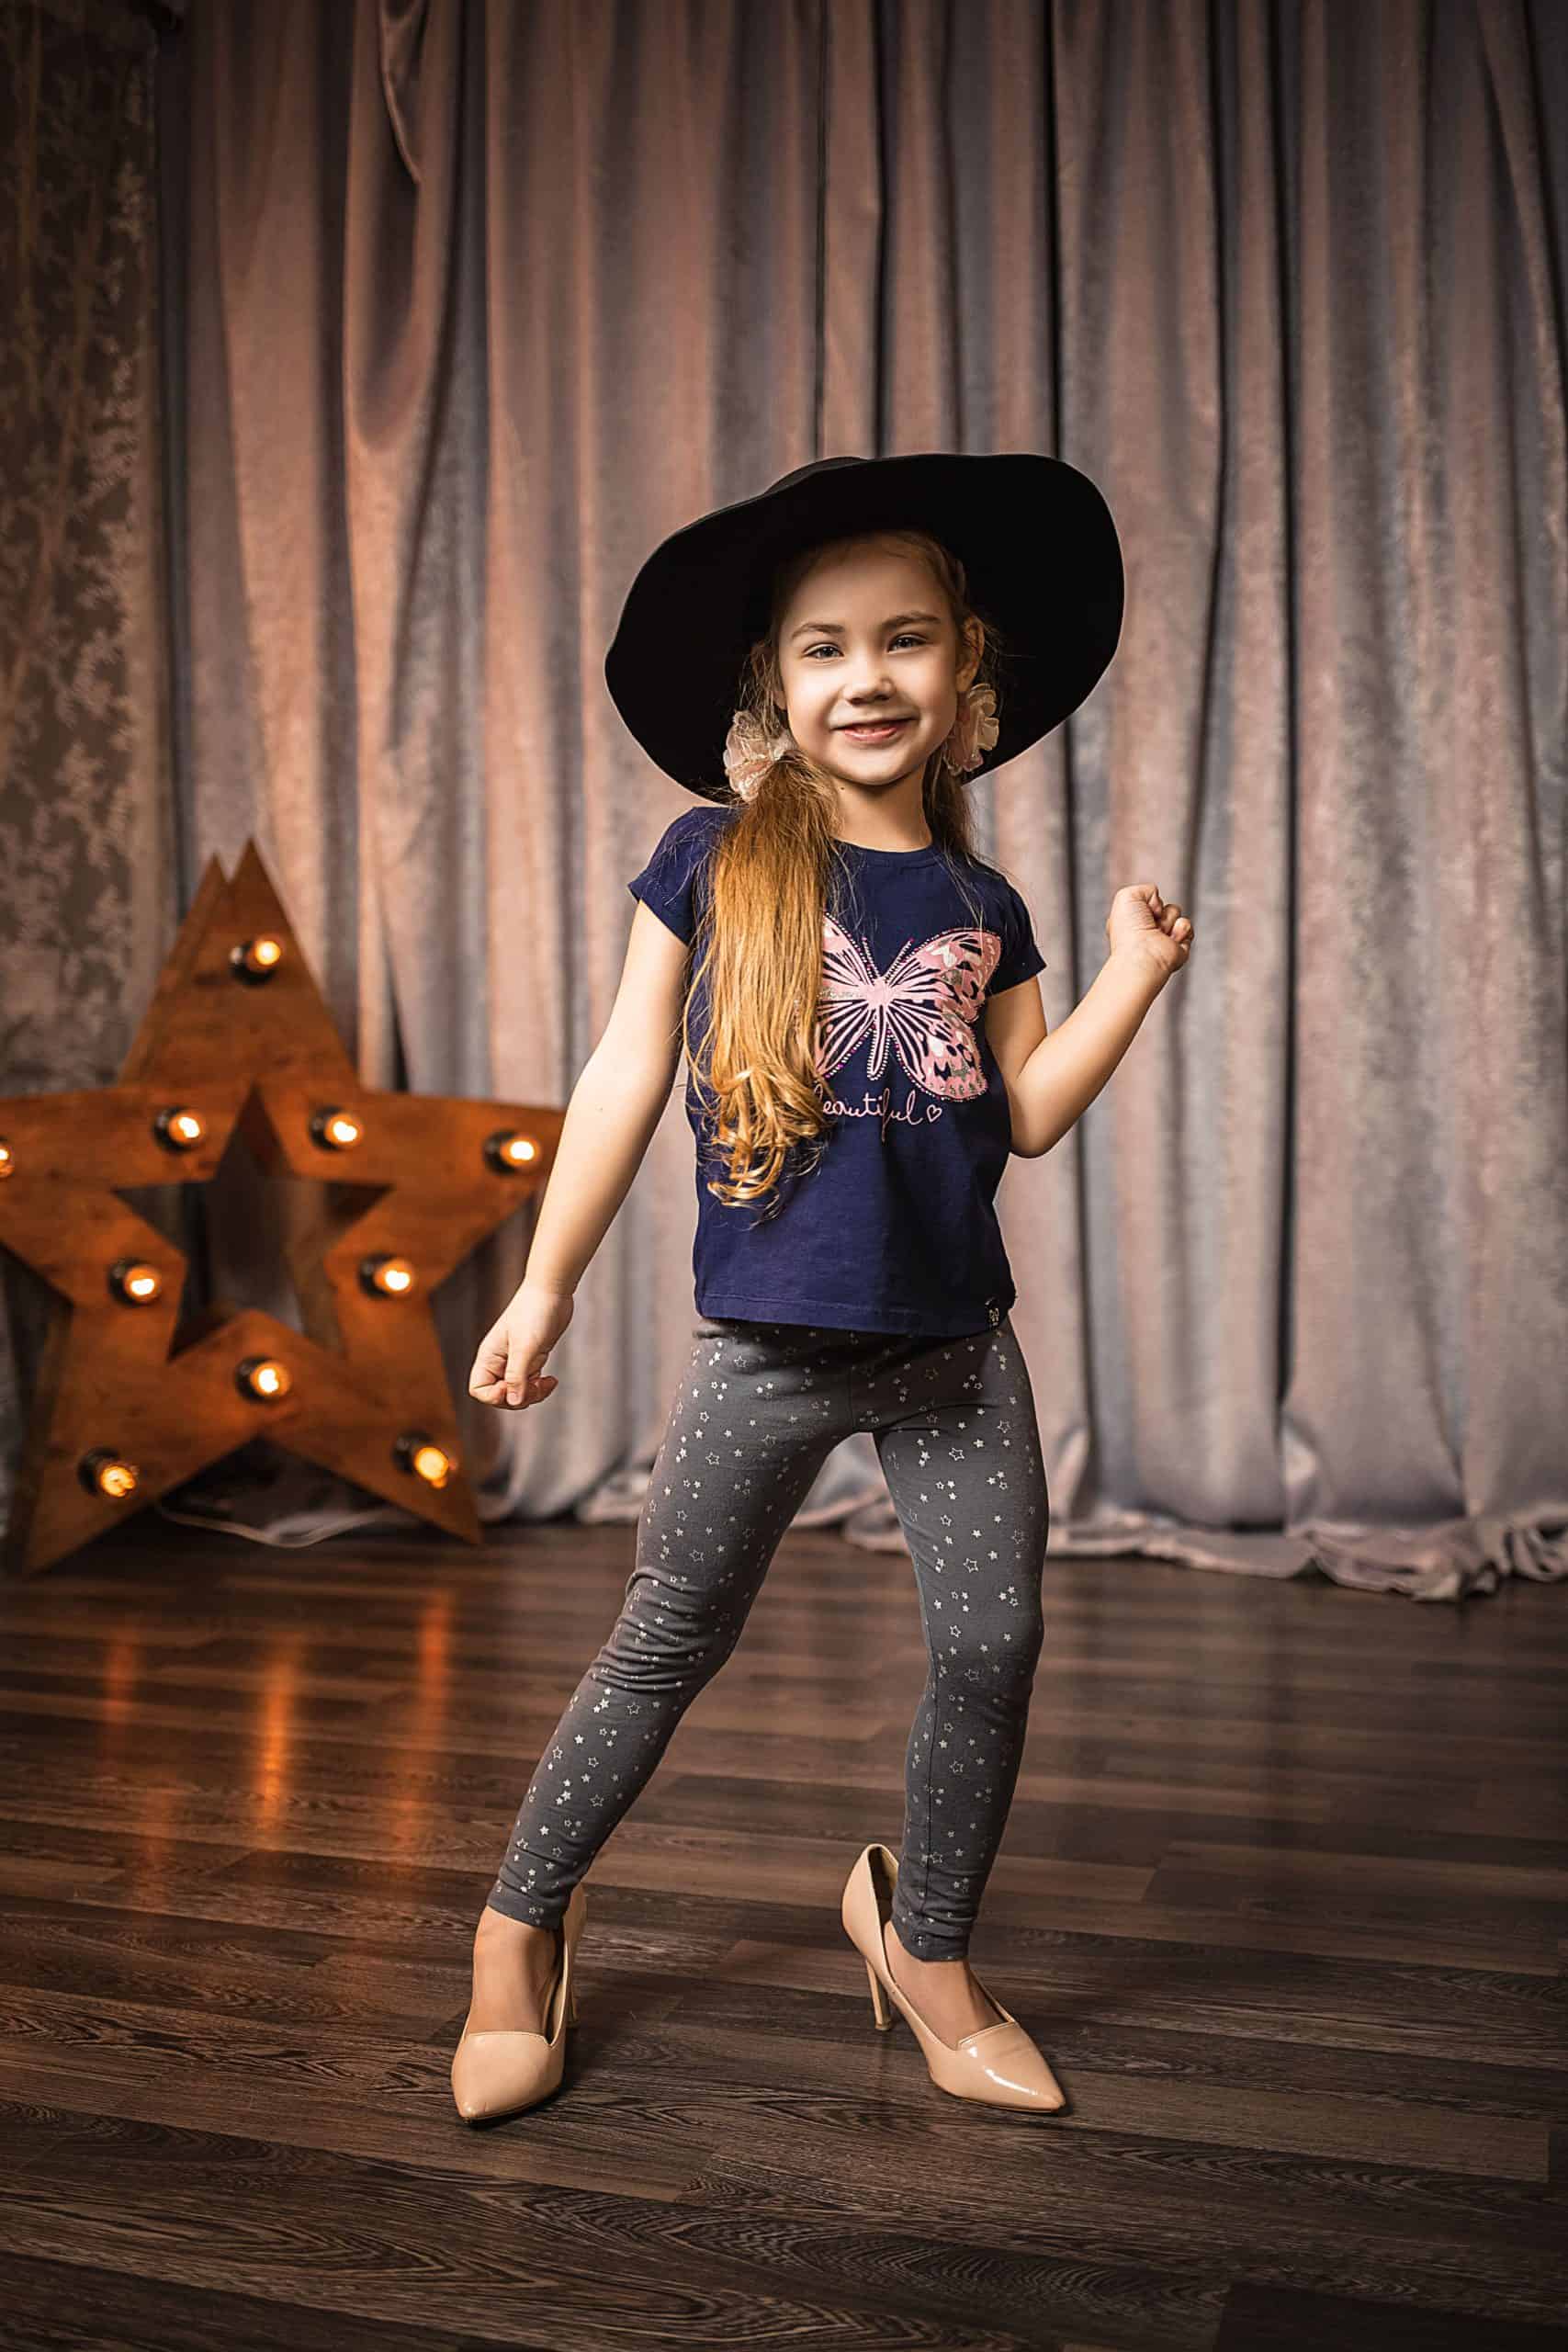 Tips for choosing the right dance class for your child